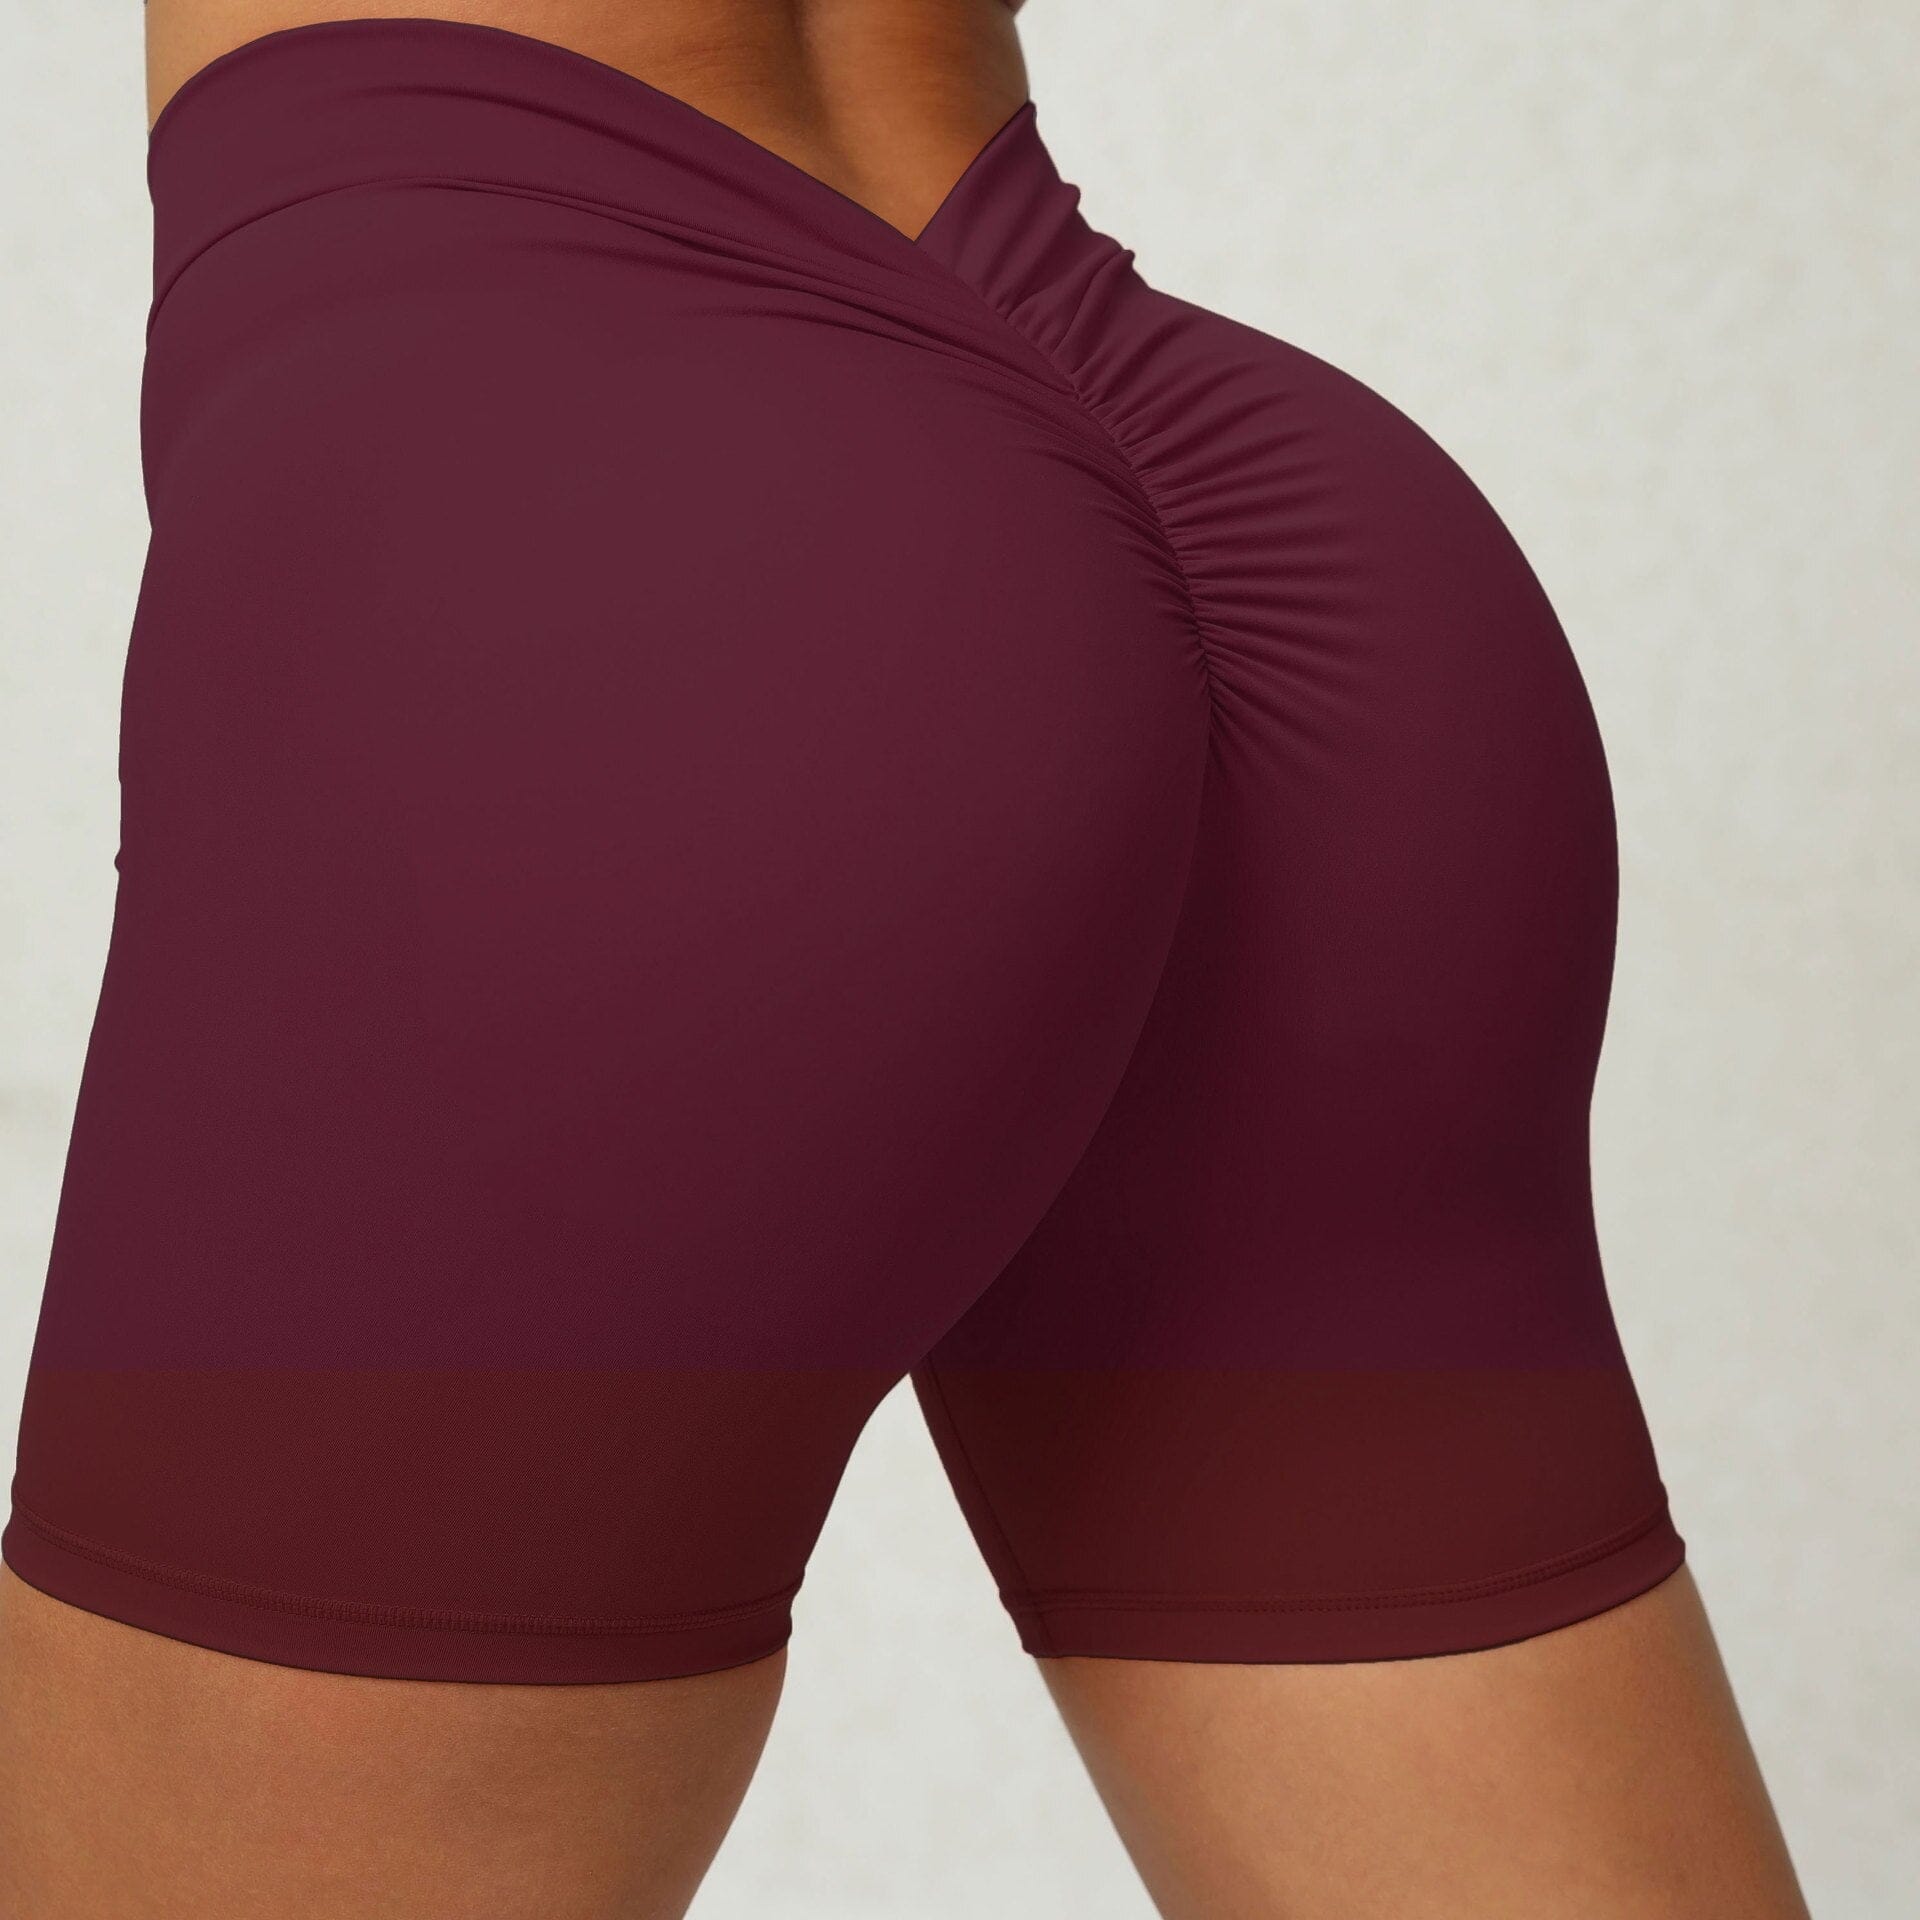 Cojé 2023 Summer Must Have- The 'V' Booty Sculptor Shorts or